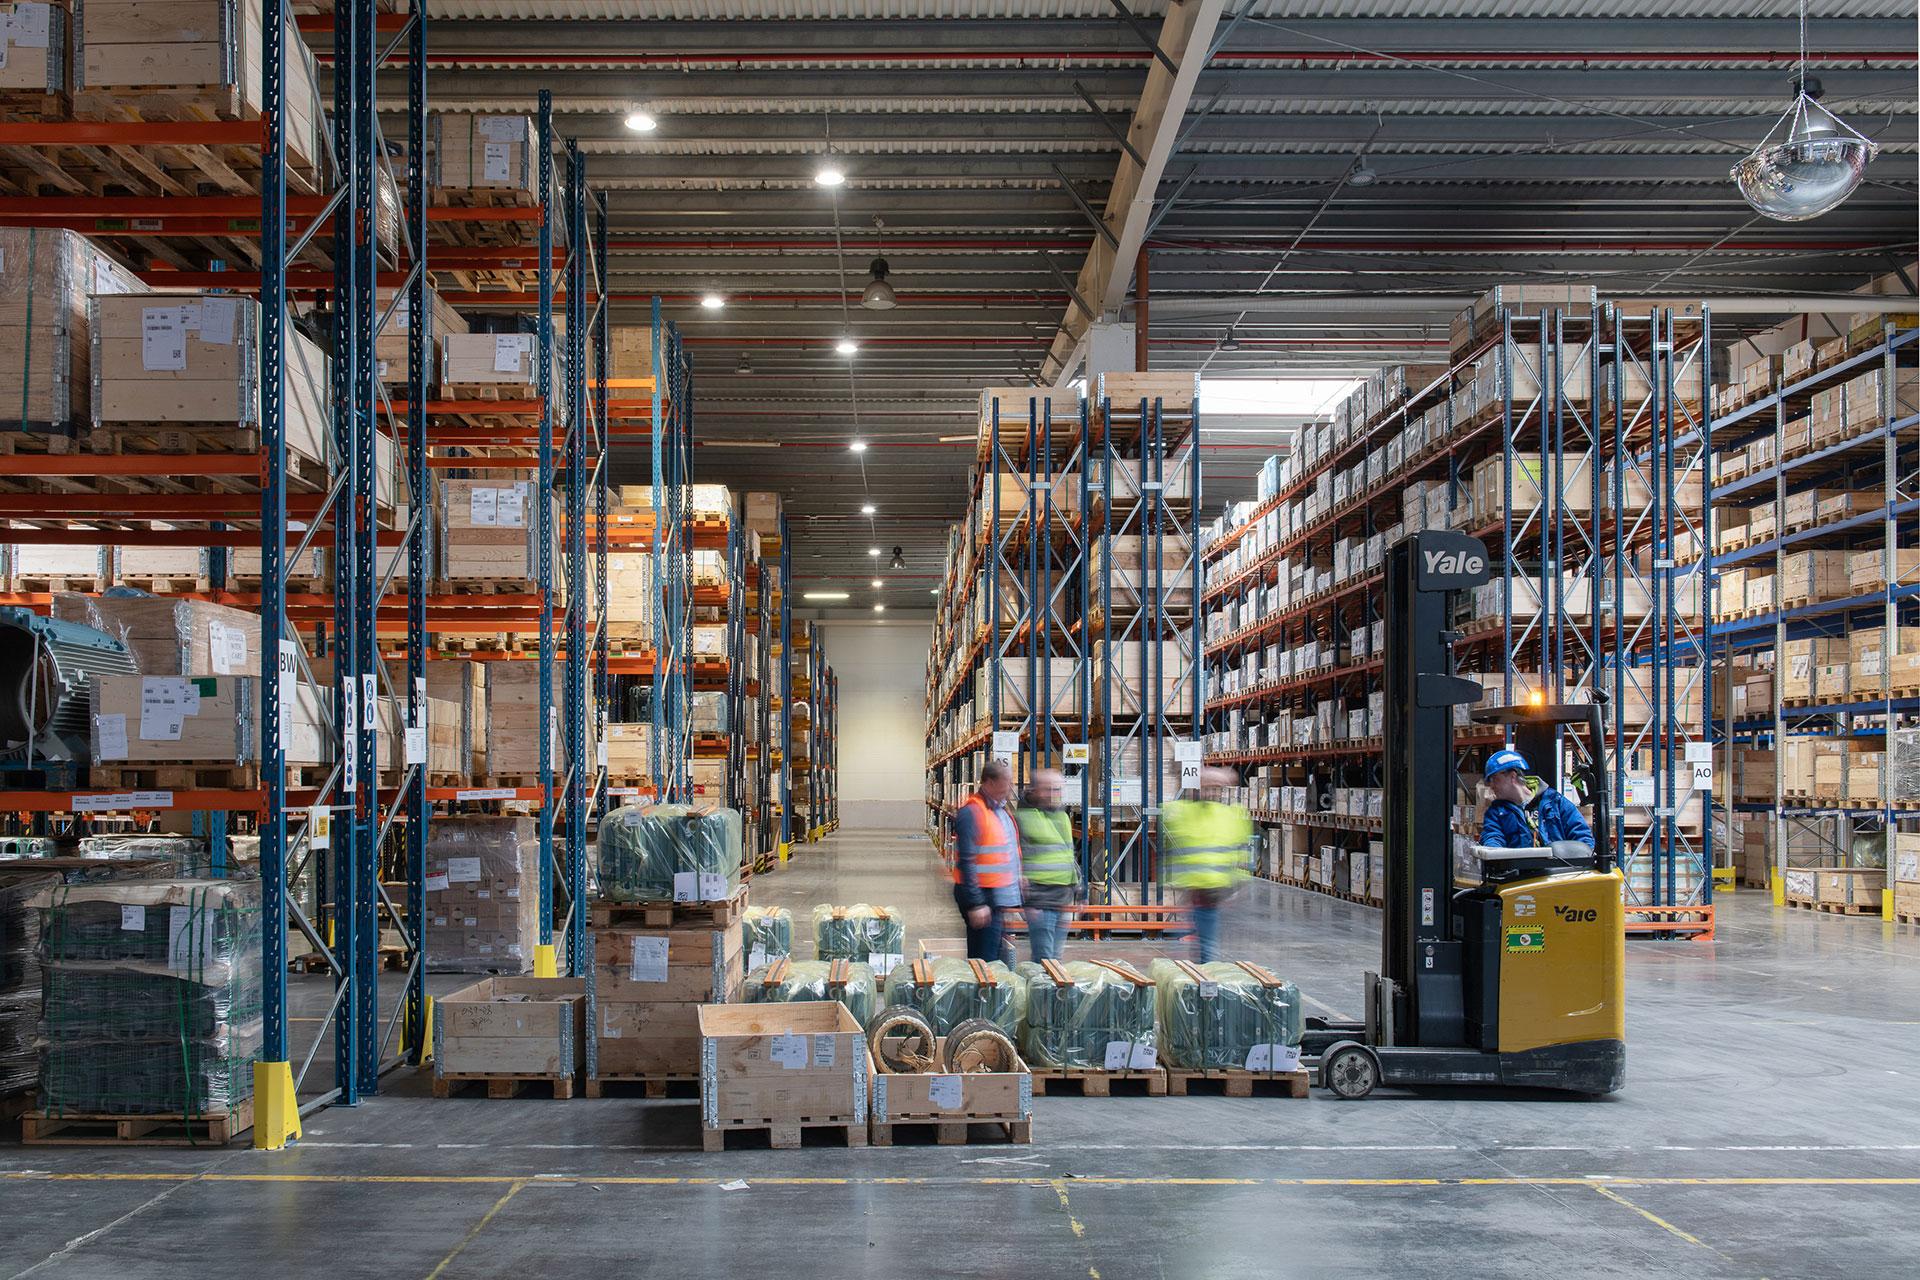 INDU BAY luminaire ensures excellent visibility so workers from Sistema Poland can easily identify parcels in the warehouse